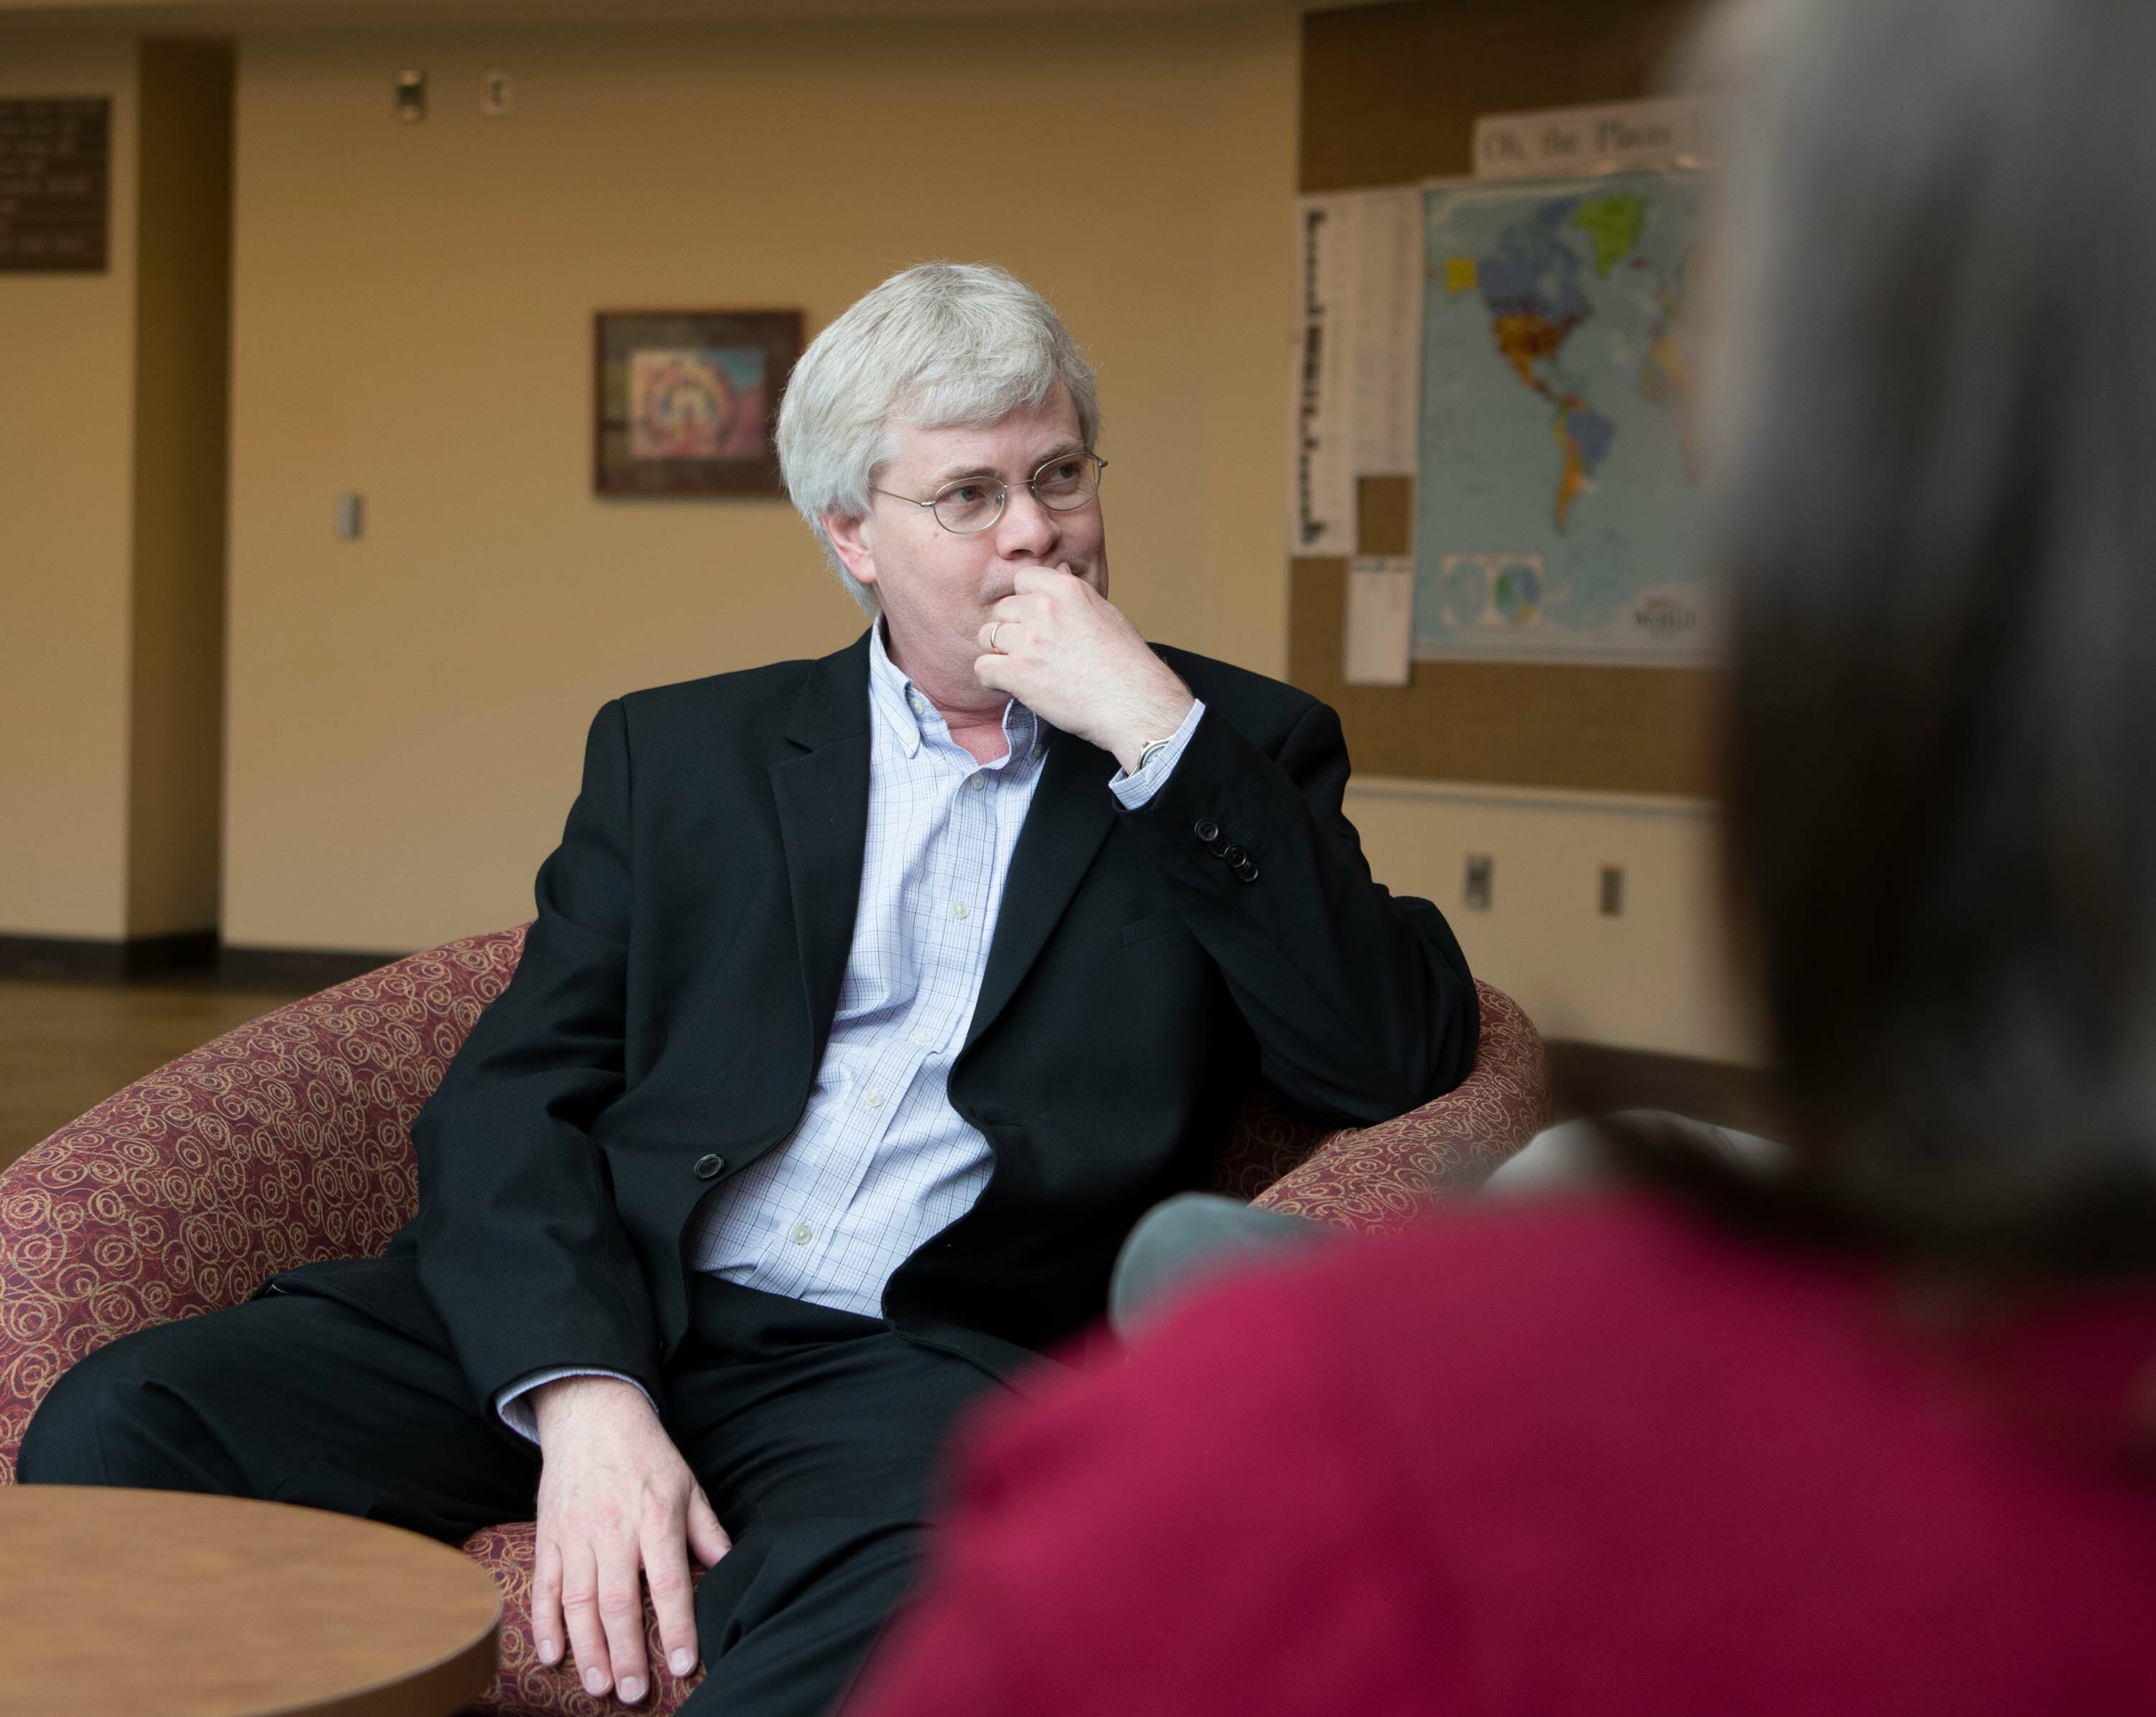 Political science professor sits in thoughtful discussion with others